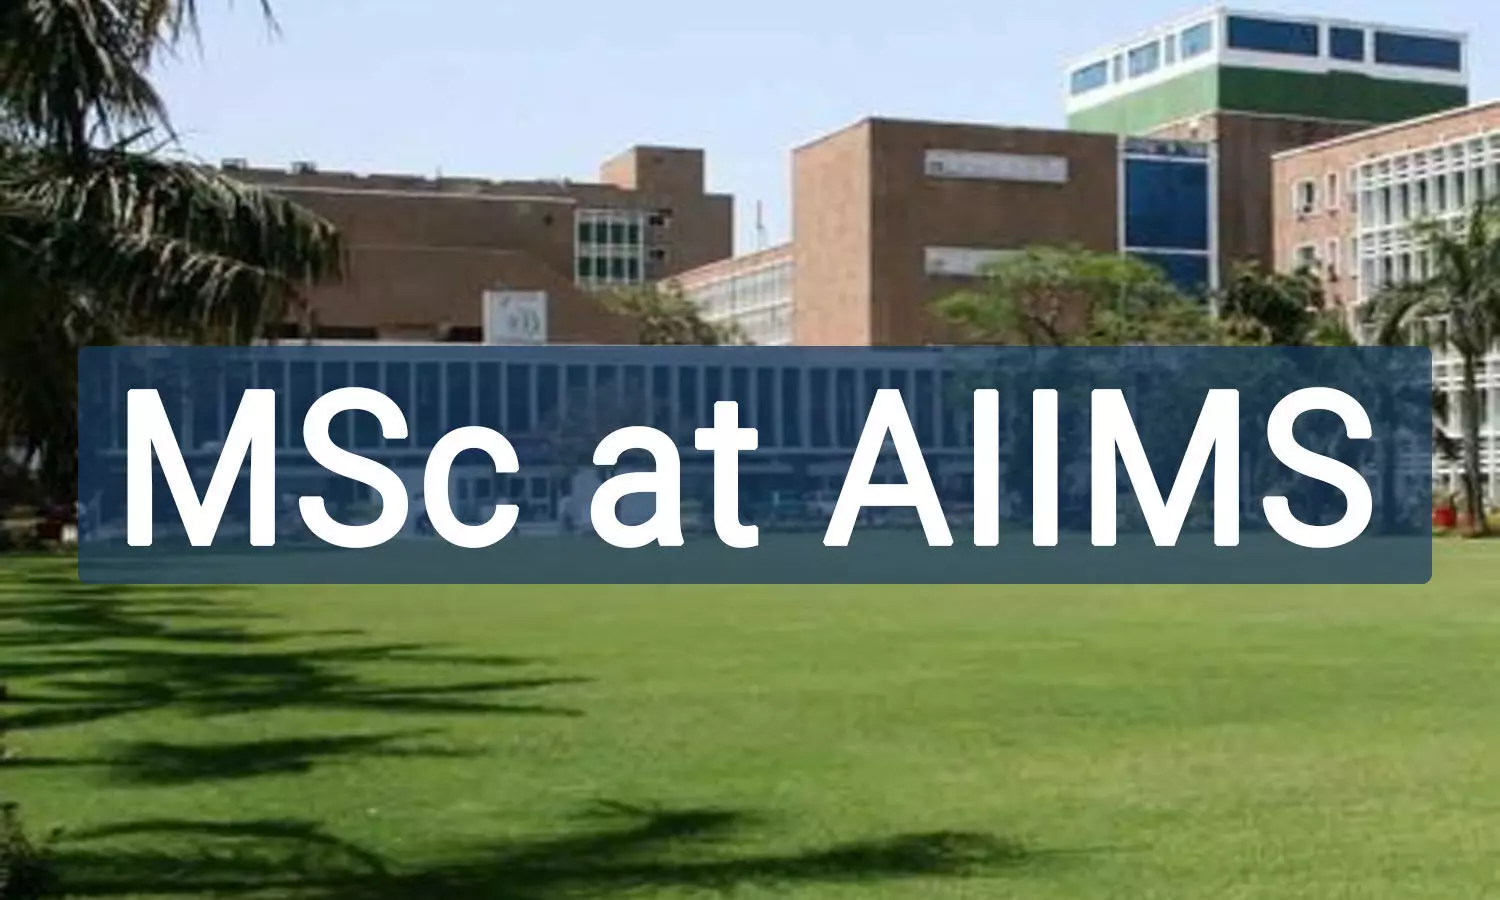 AIIMS issues notice on registration process for MSc courses 2021 session